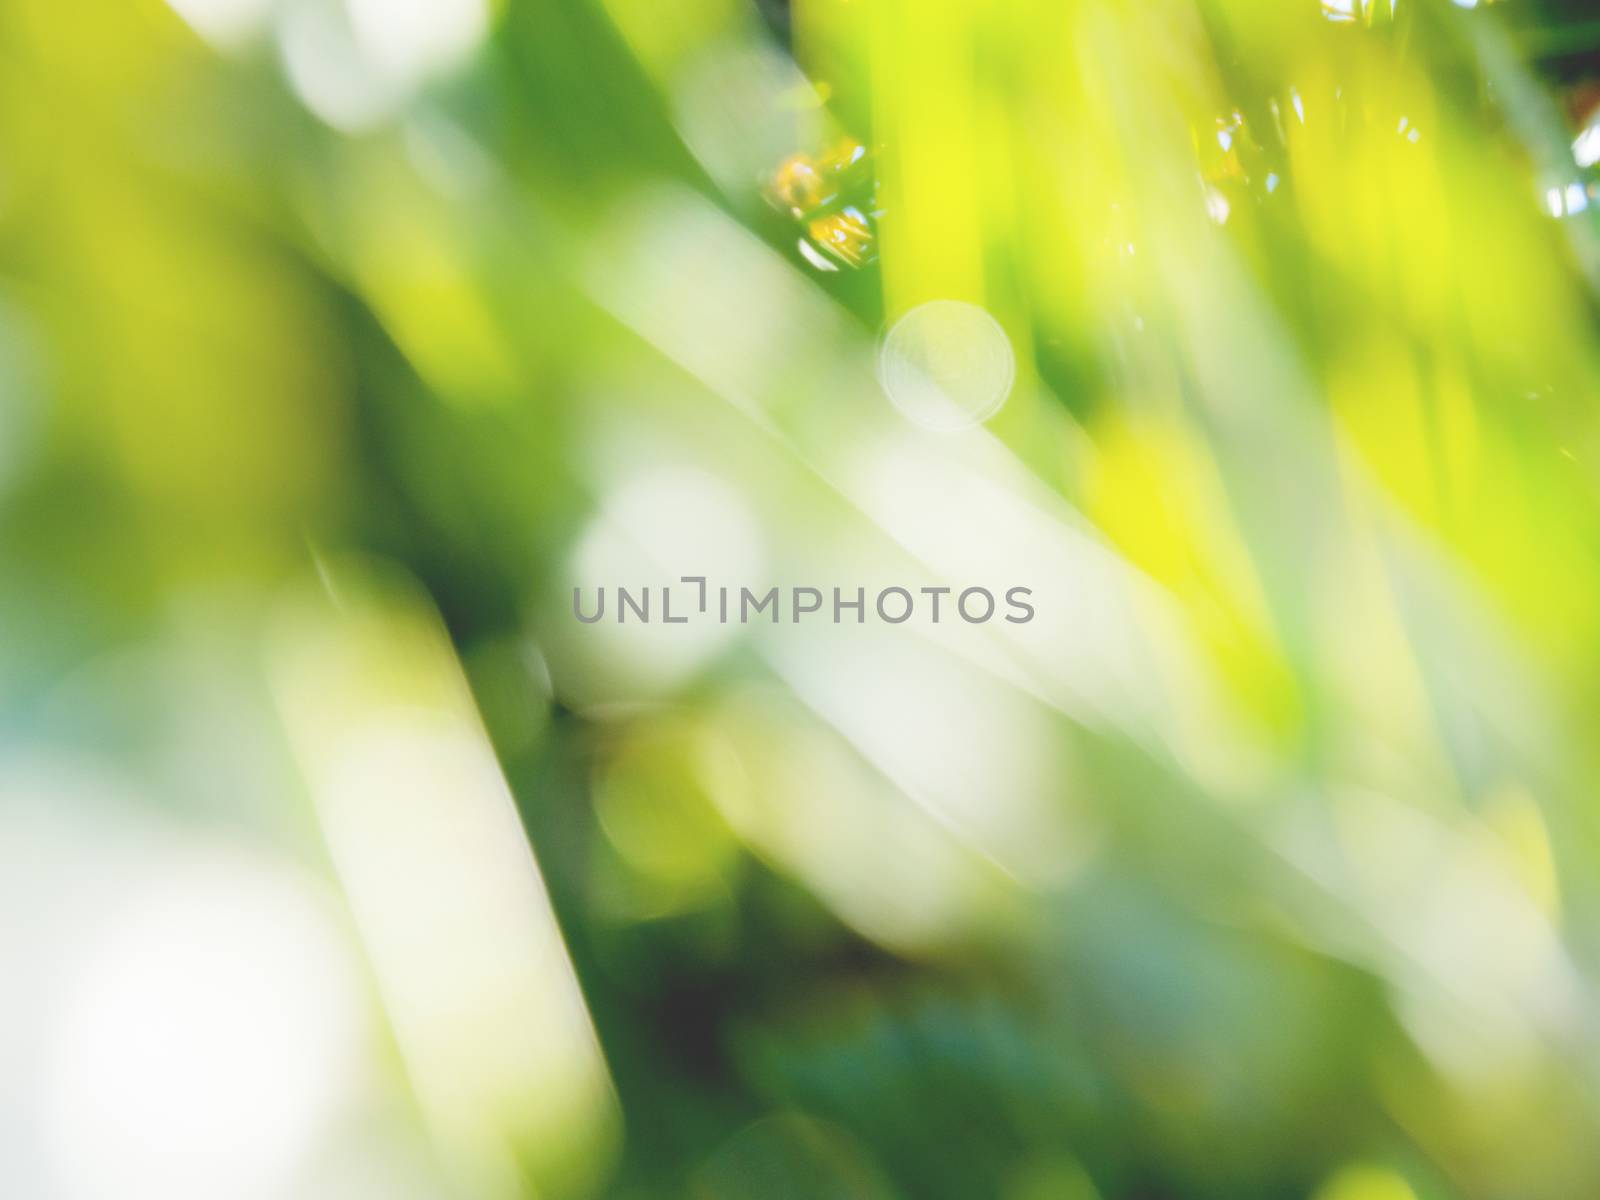 Sun shines through palm tree leaves. Tropical tree with fresh green foliage. Natural defocused background.